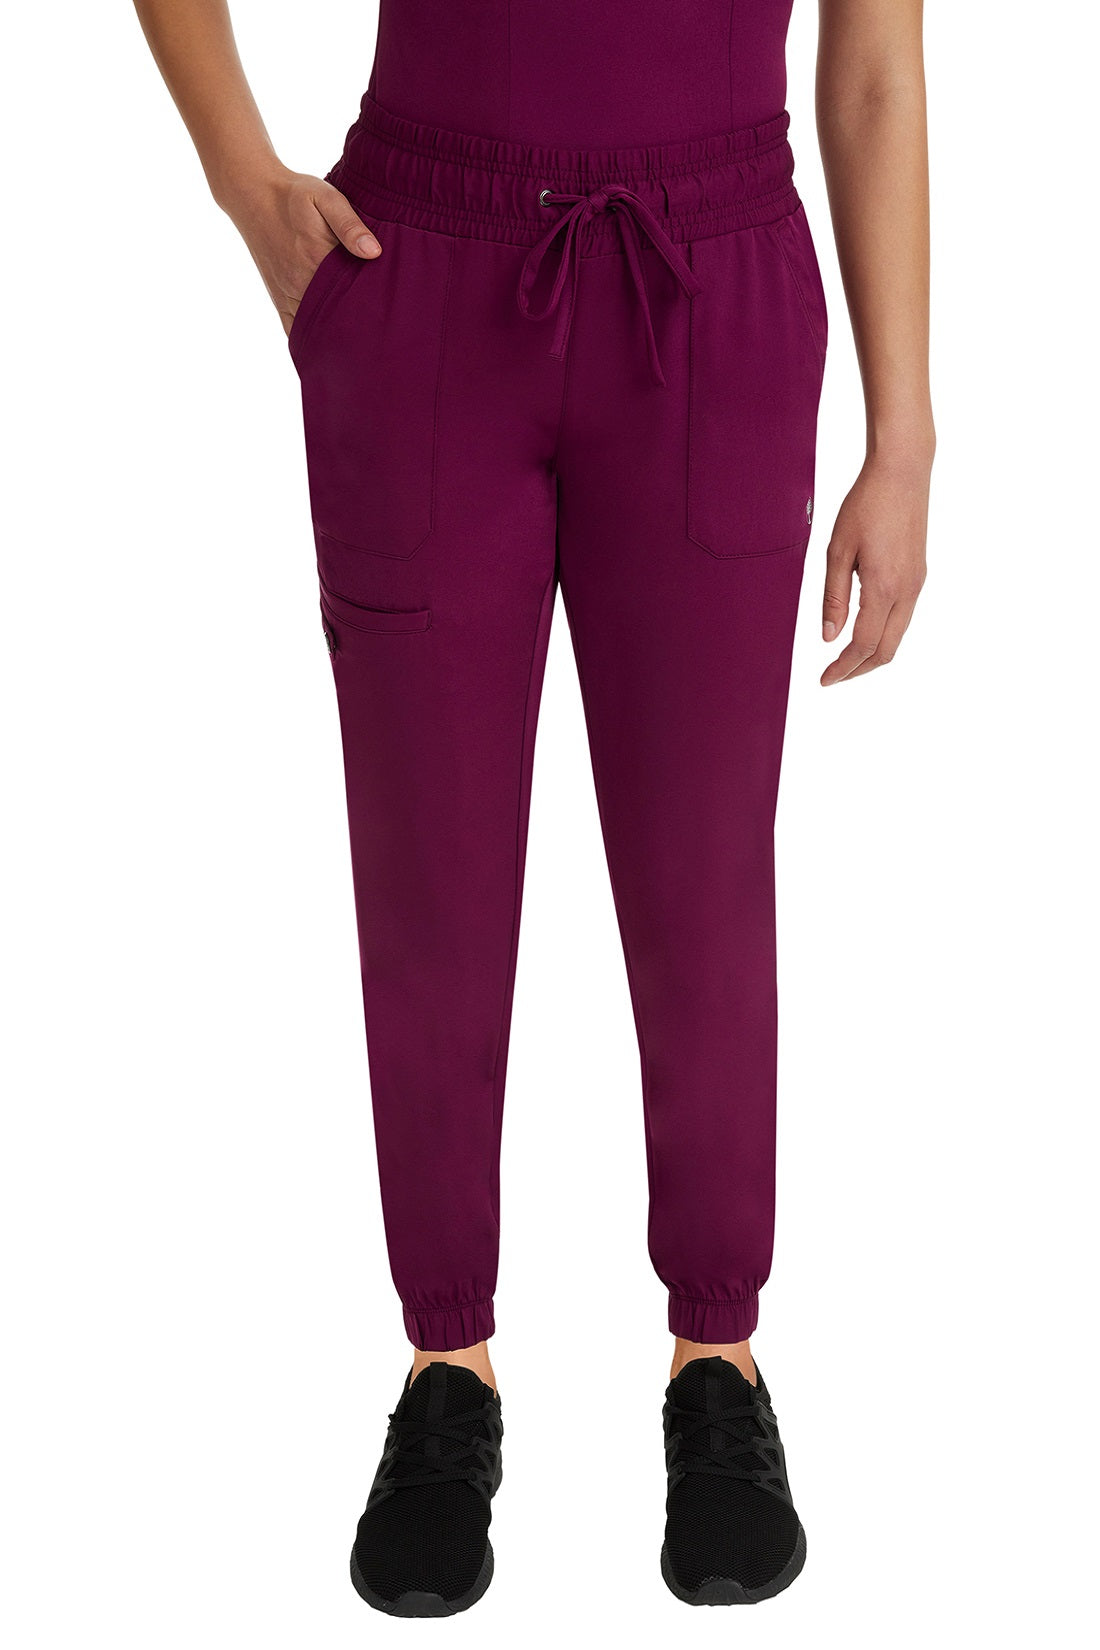 Healing Hands Clearance Sale Jogger Scrub Pants HH Works Renee in Wine at Parker's Clothing and Shoes.